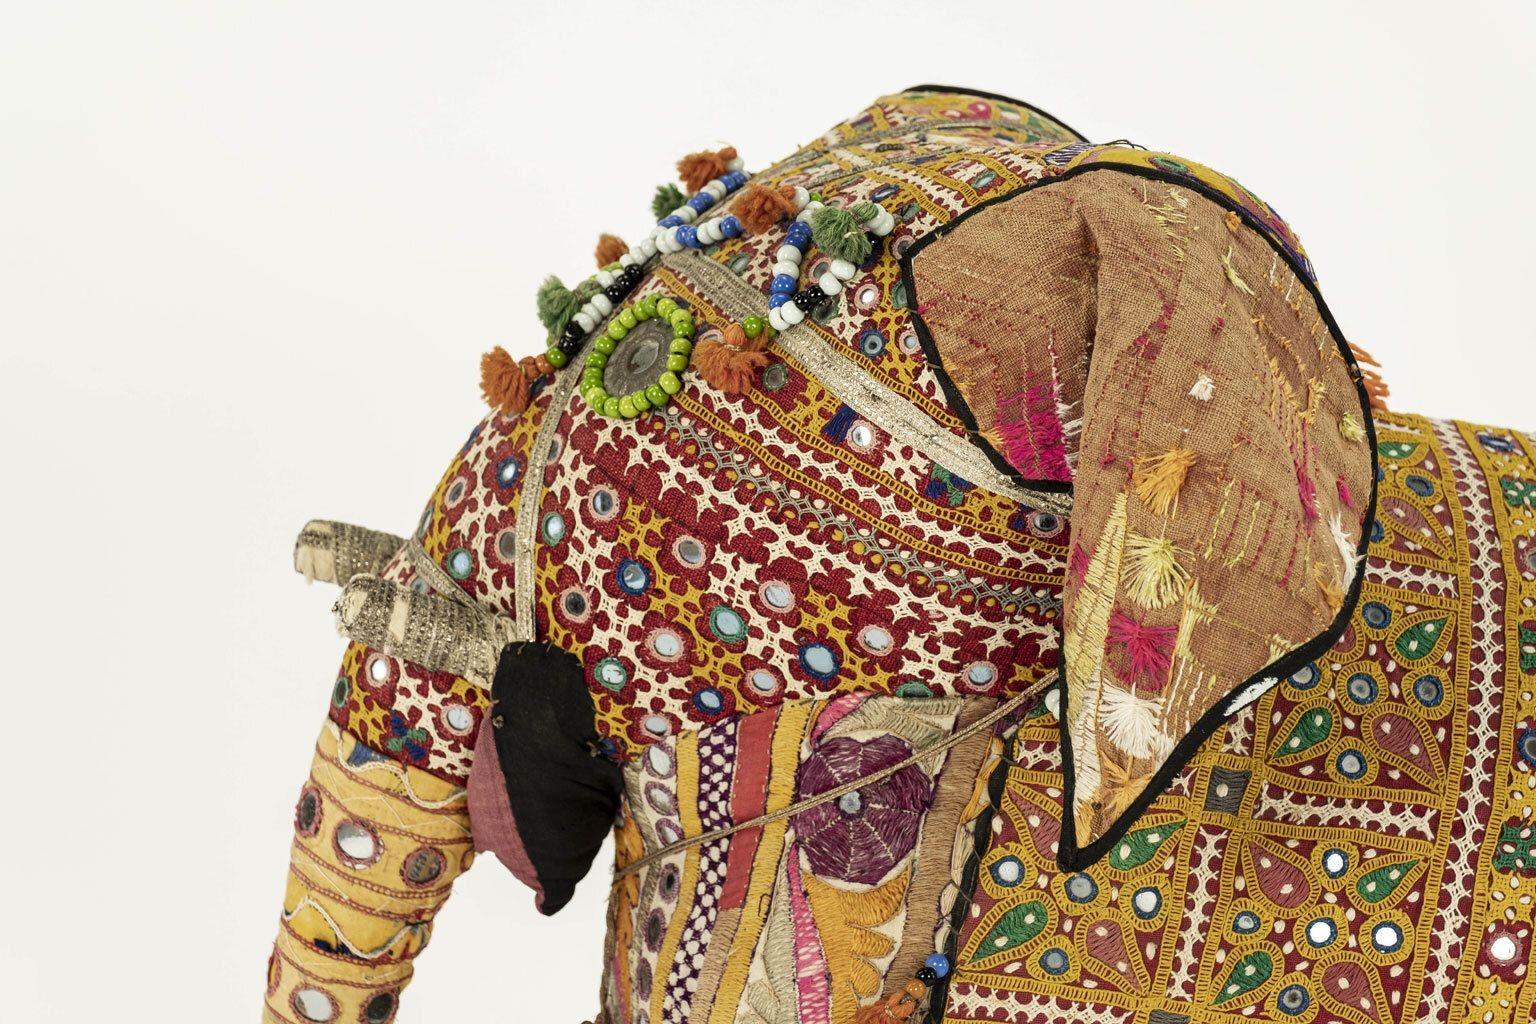 Massive vintage cotton elephant, covered in Indian textiles, retailed in the 1950s by Harrods. Exterior decorated in embroidered designs, tassels, tiny mirrors, beads, metallic trim and a brass bell. Interior frame composed of wire and straw.